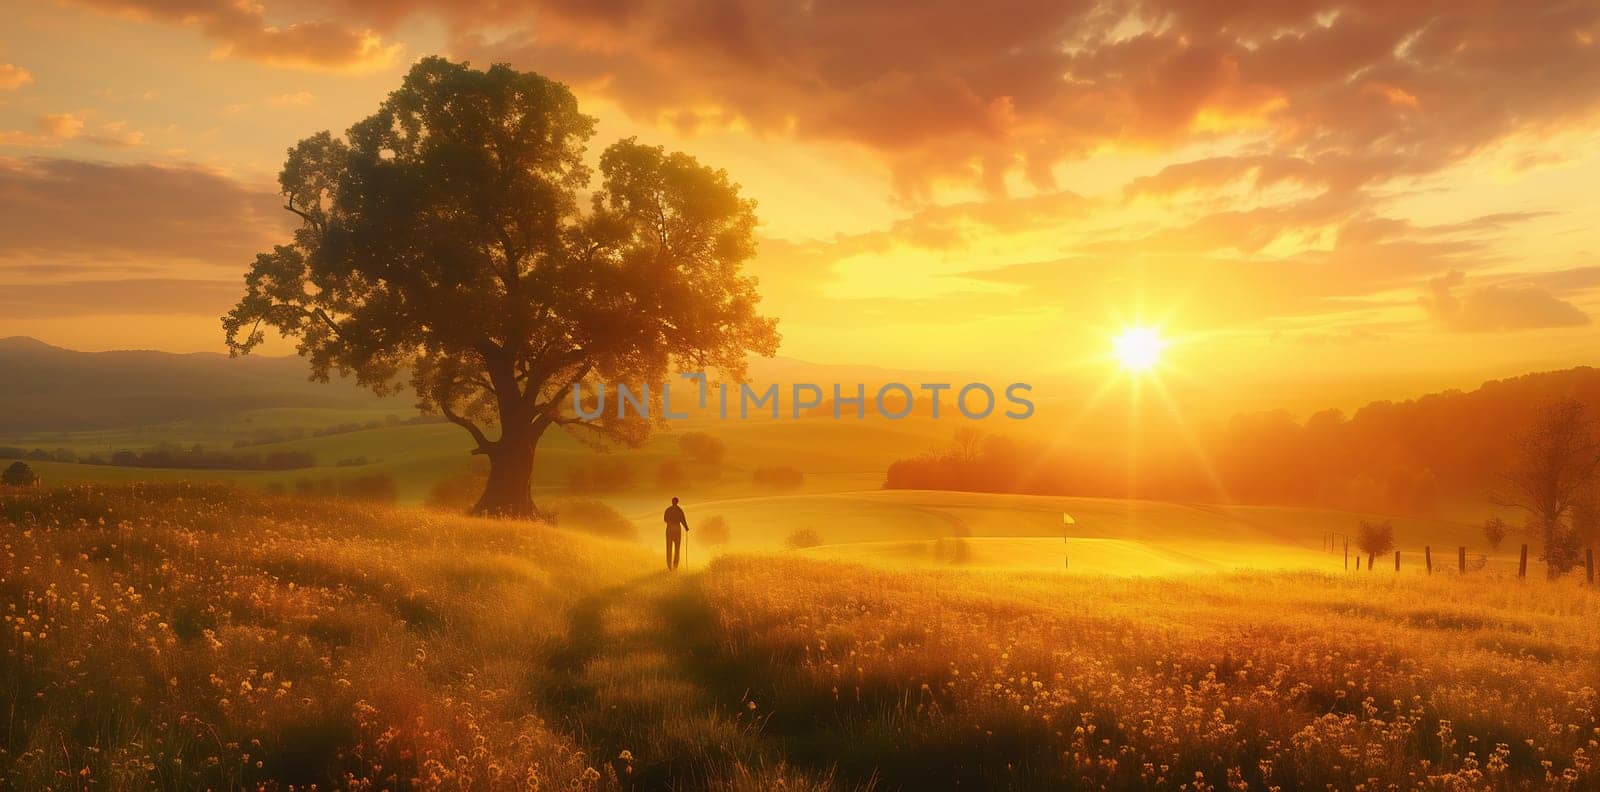 Sunset Sunrise In Misty Autumn Meadow Landscape With Lonely Tree. Sun Sunshine With Natural Sunlight Through Wood Tree In Morning. Scenic View. Autumn Nature. Panoramic View. High quality photo